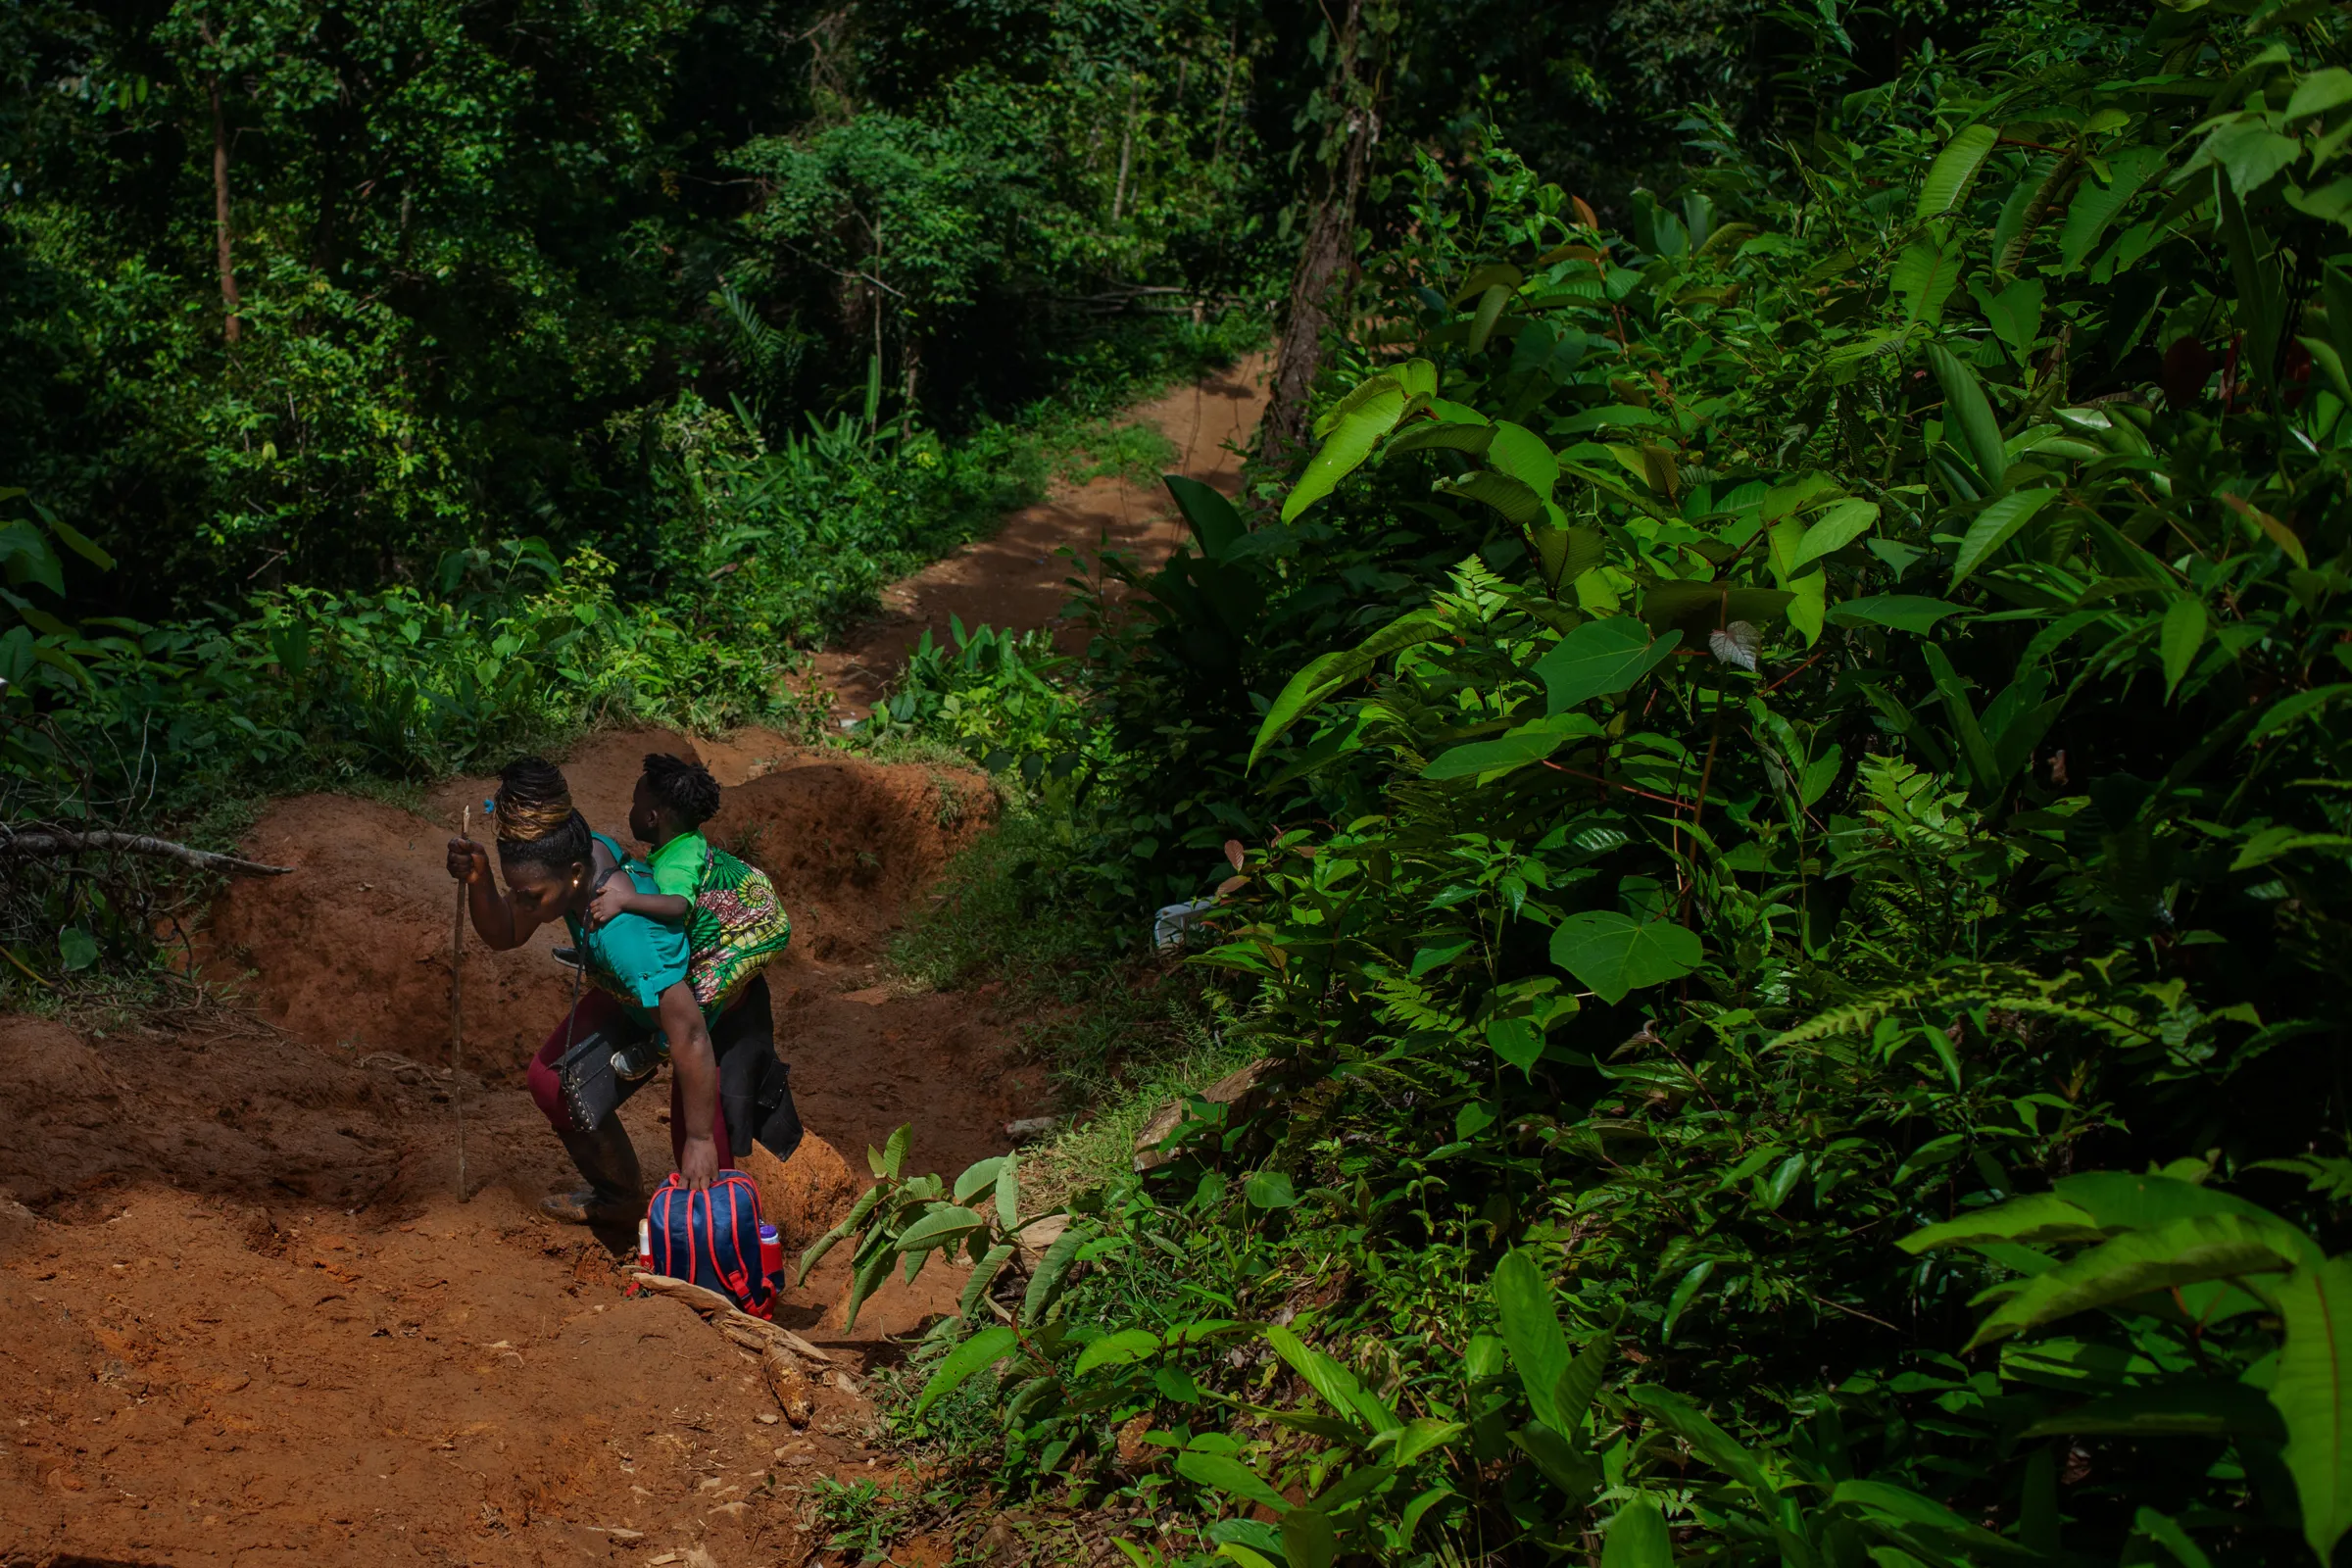 A migrant from Sierra Leone carries her child as she climbs up a Colombian jungle path through the Darién Gap, Colombia July 27, 2022. Thomson Reuters Foundation/Fabio Cuttica